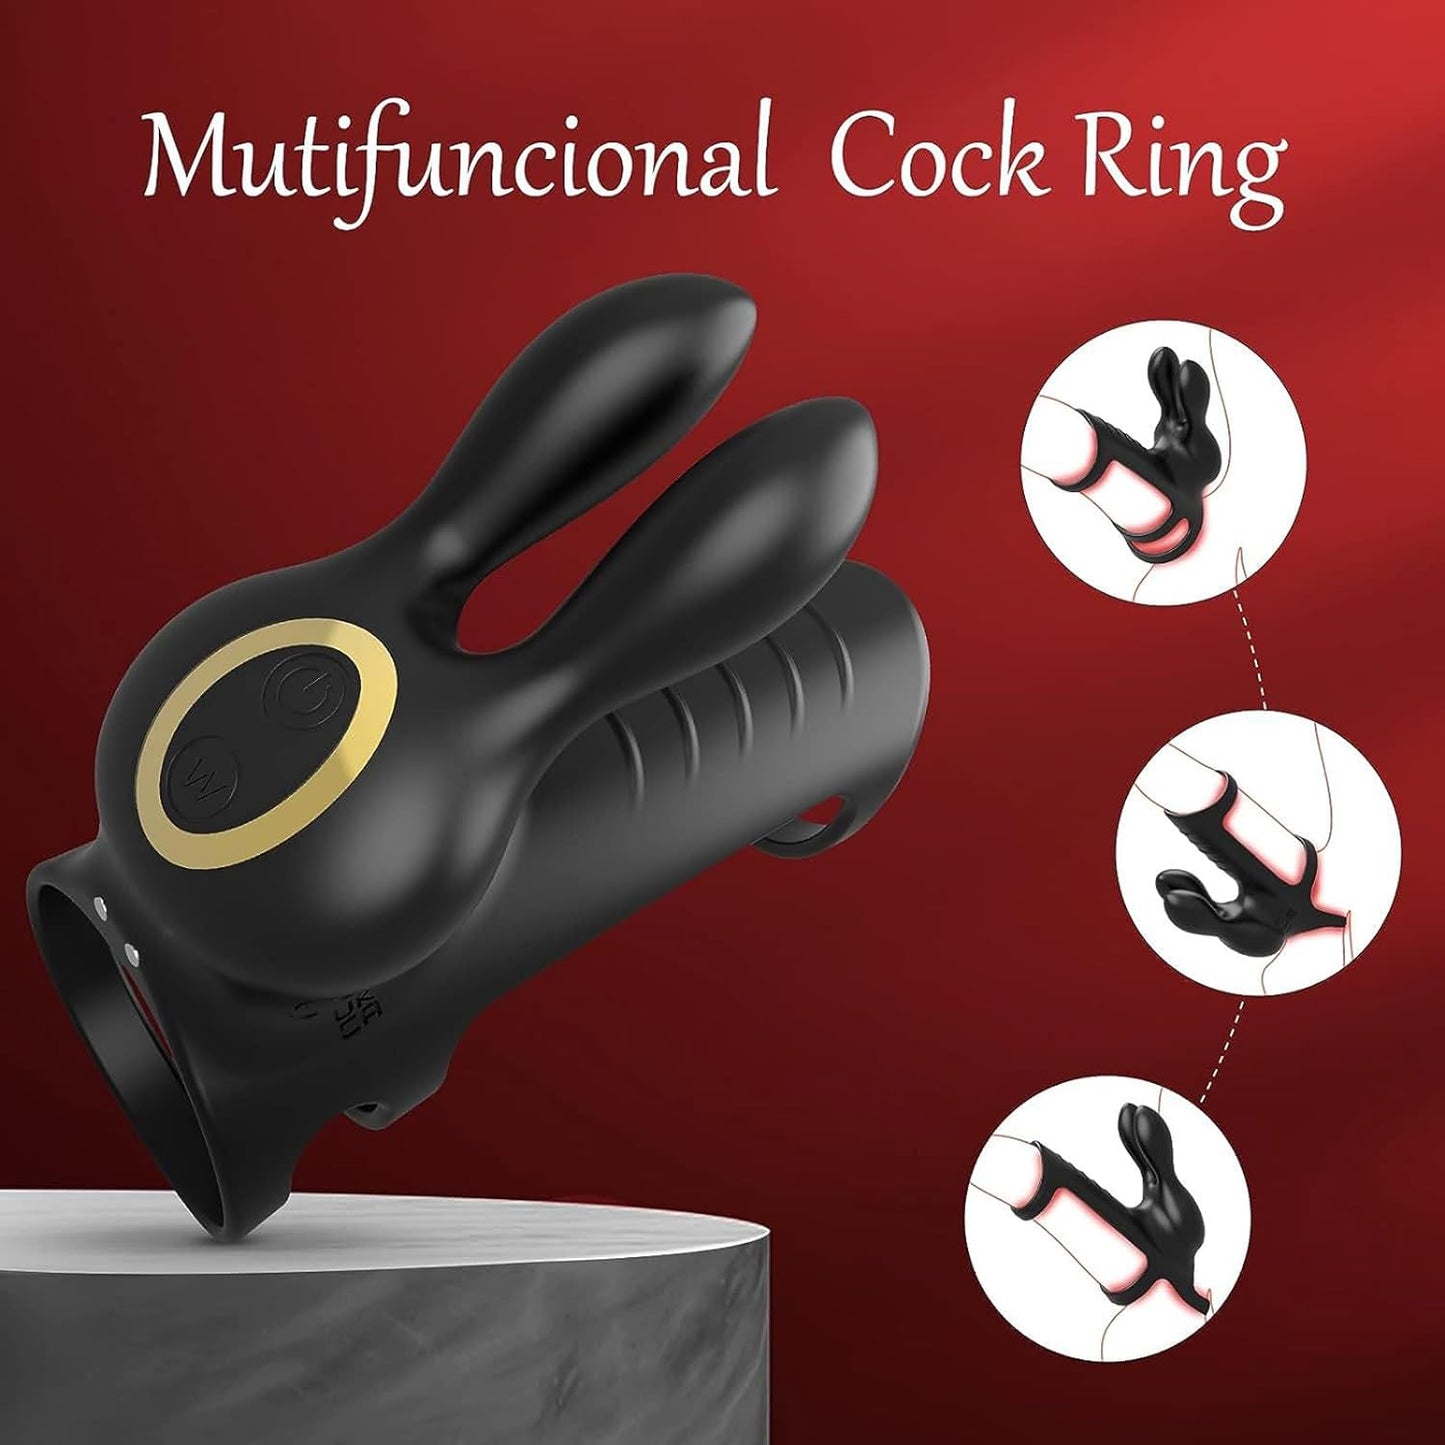 Cock ring couple vibrator penis vibrator with remote control with 10 vibrations 